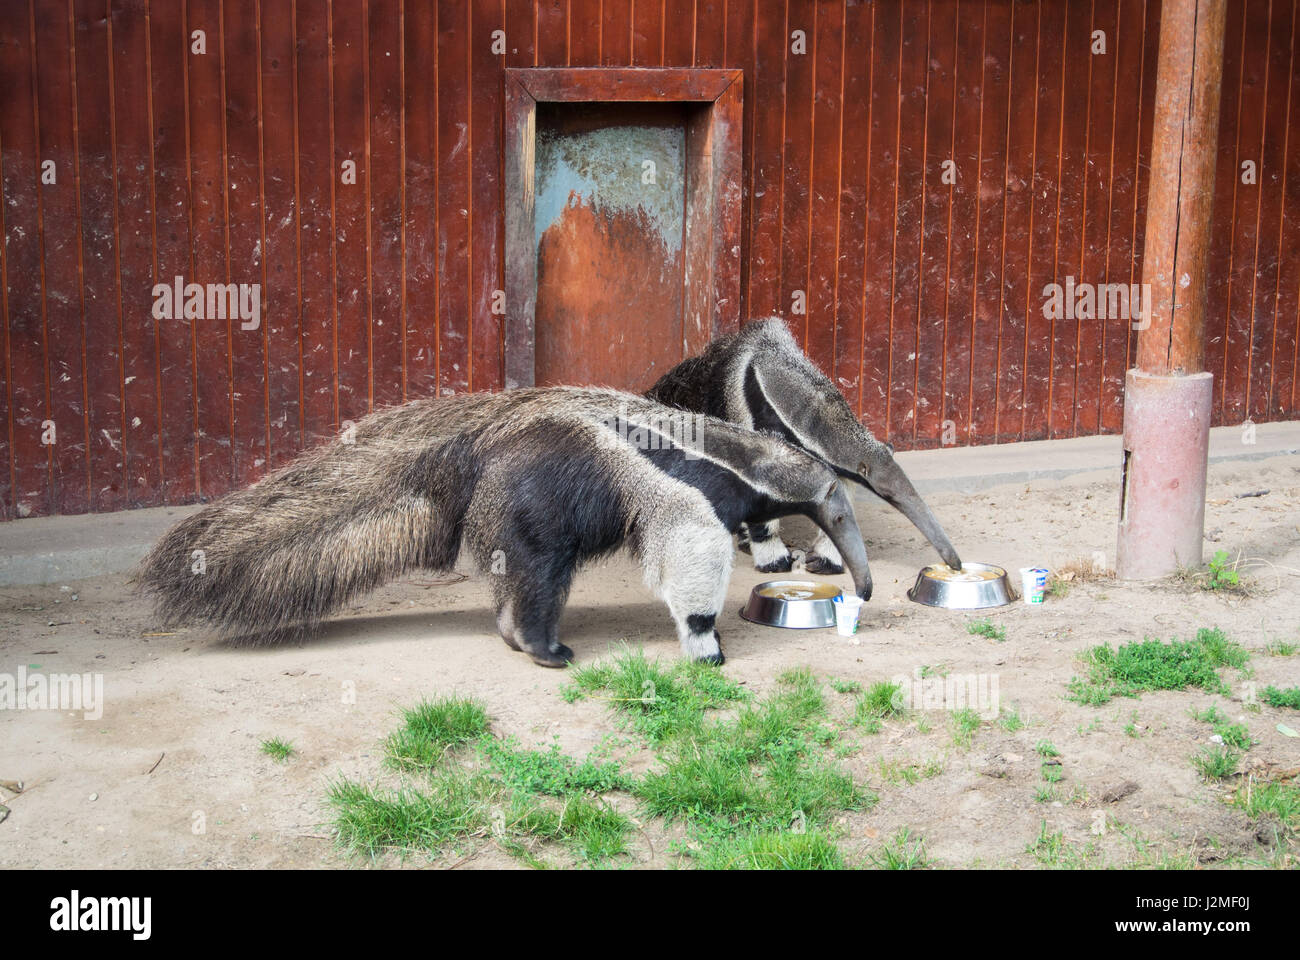 A couple of giant anteaters eat from a plate at Budapest zoo, Hungary. Stock Photo